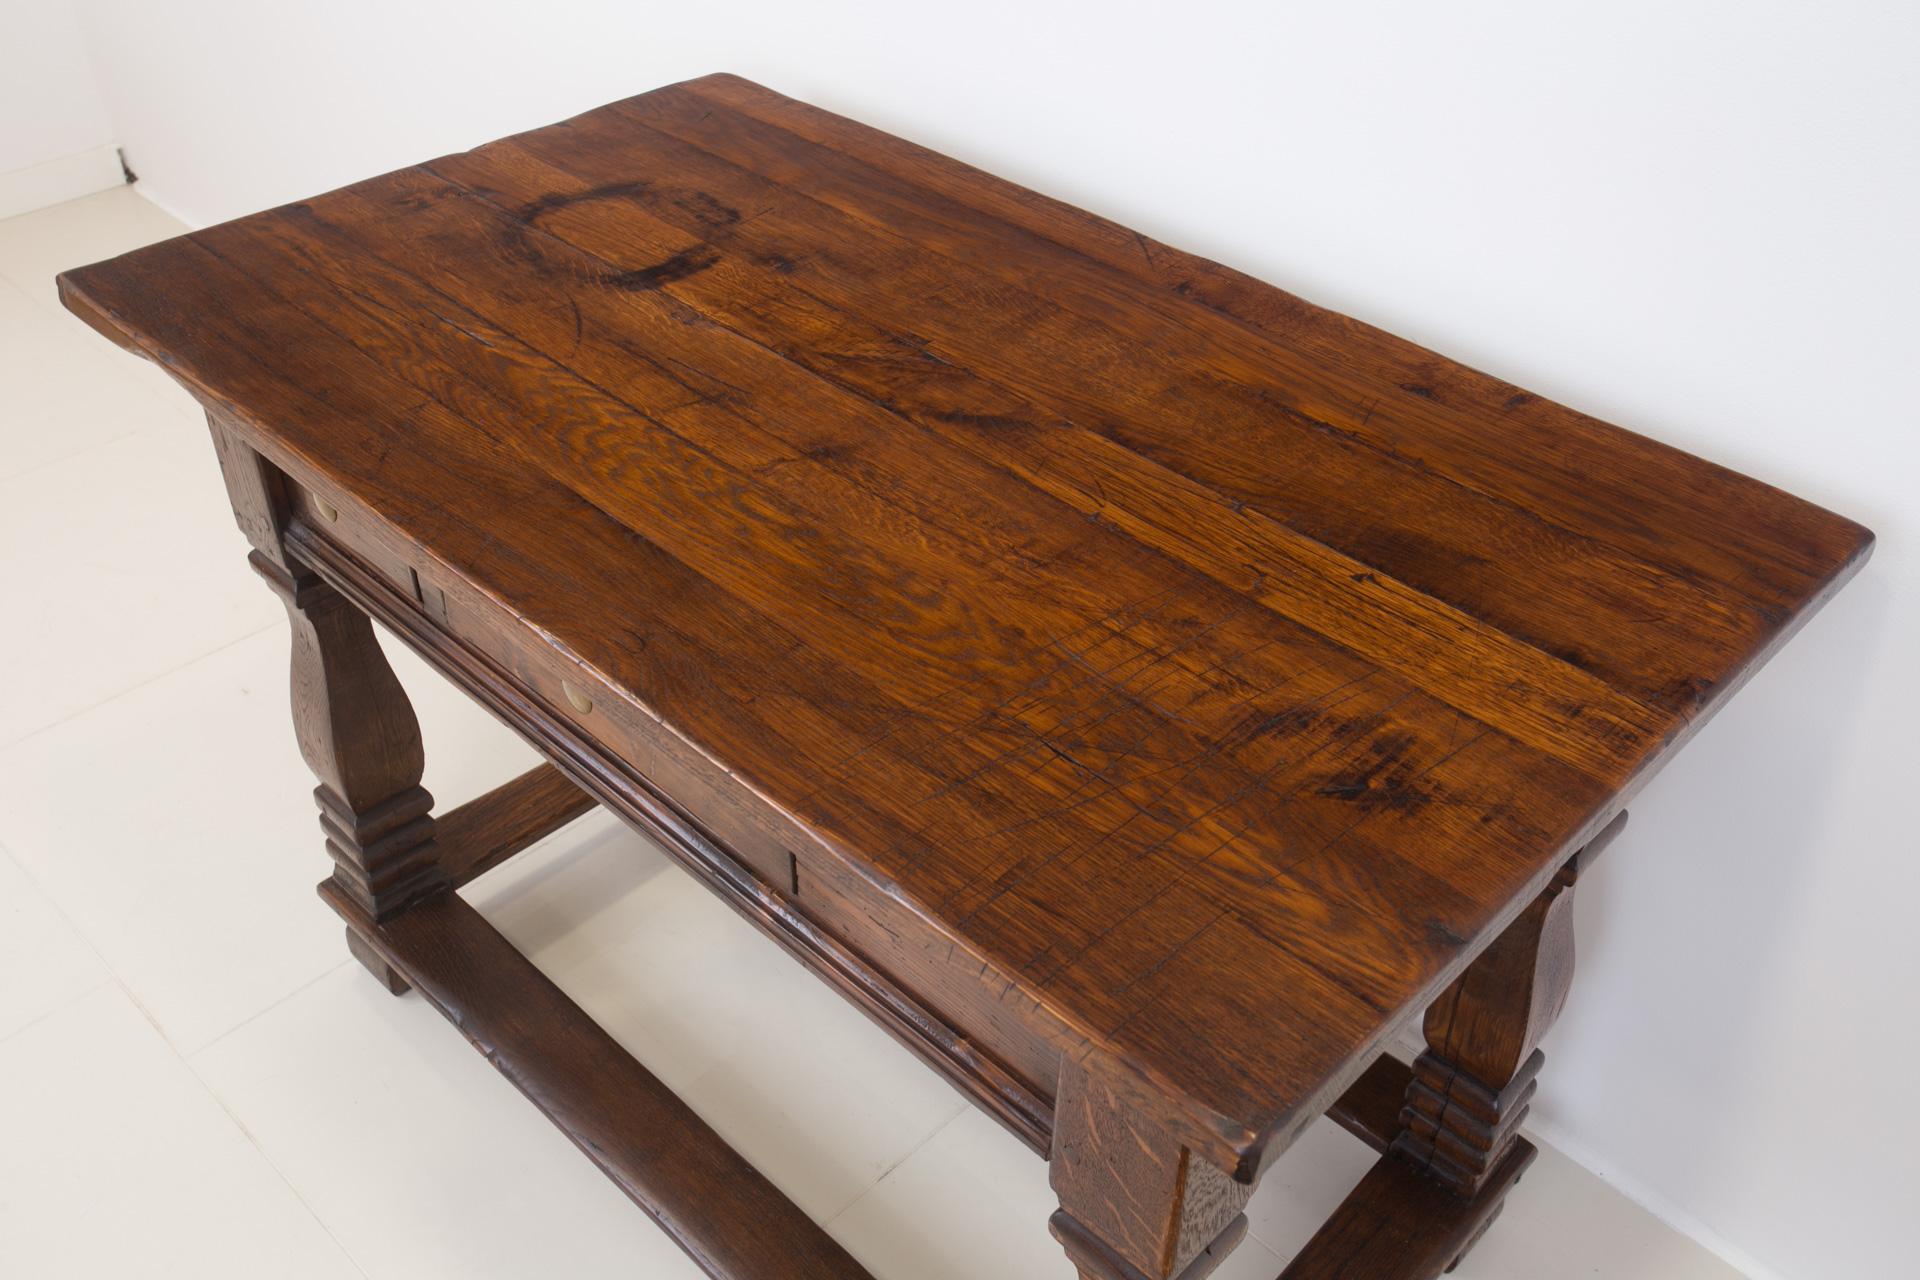 Solid Oak Table, 18th / 19th Century, Rustic Style, Prep or Dining Table 7